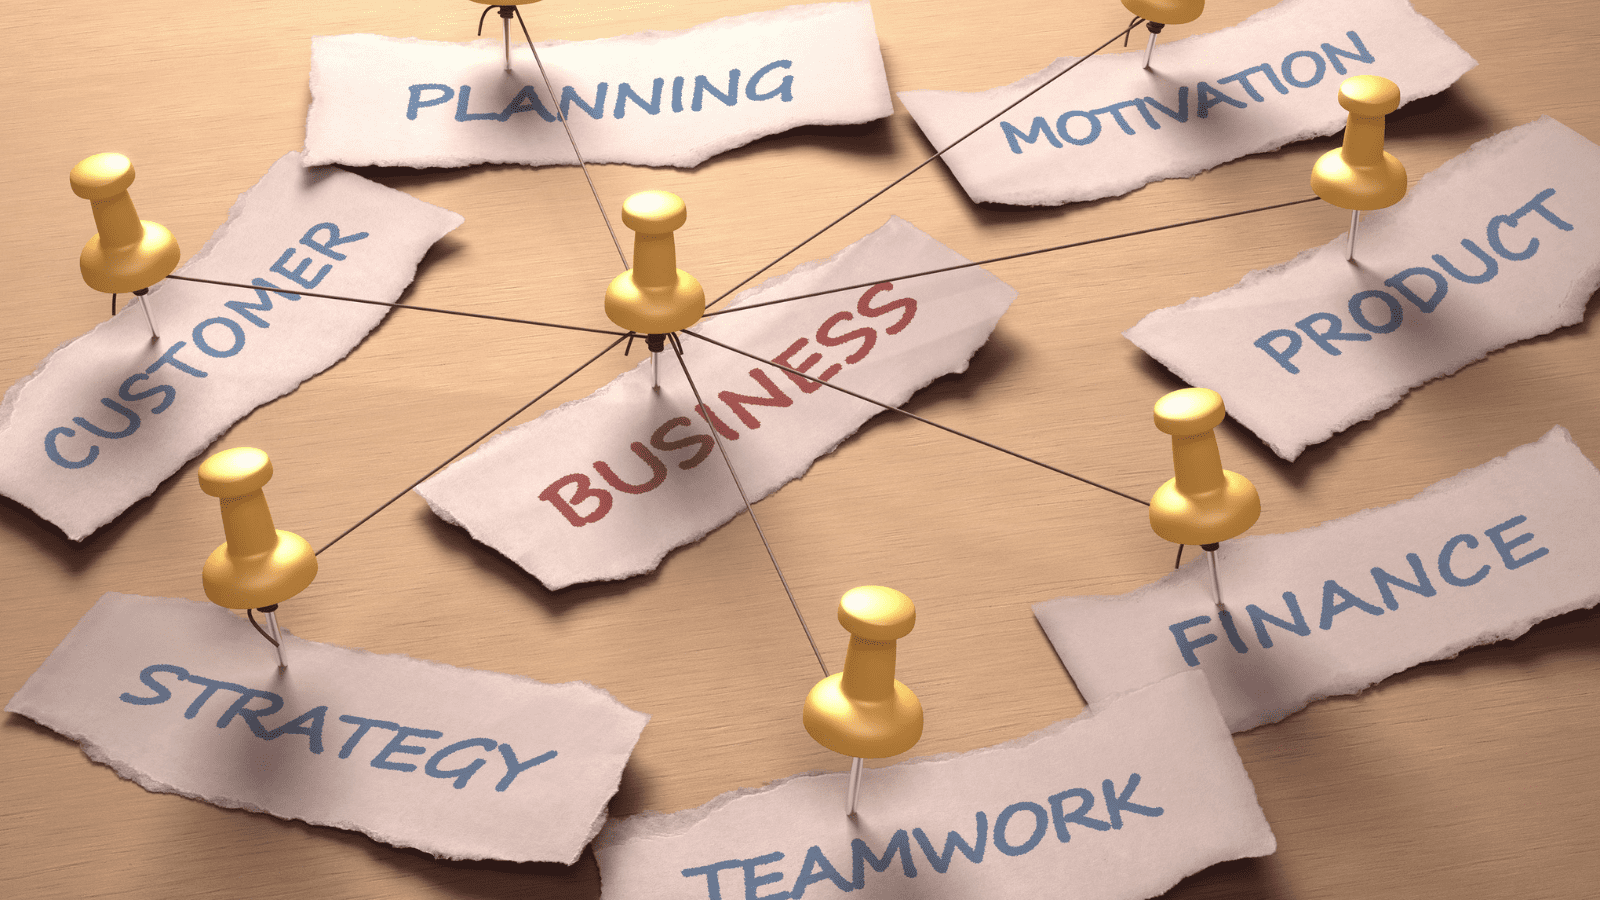 Different aspects that make up a business